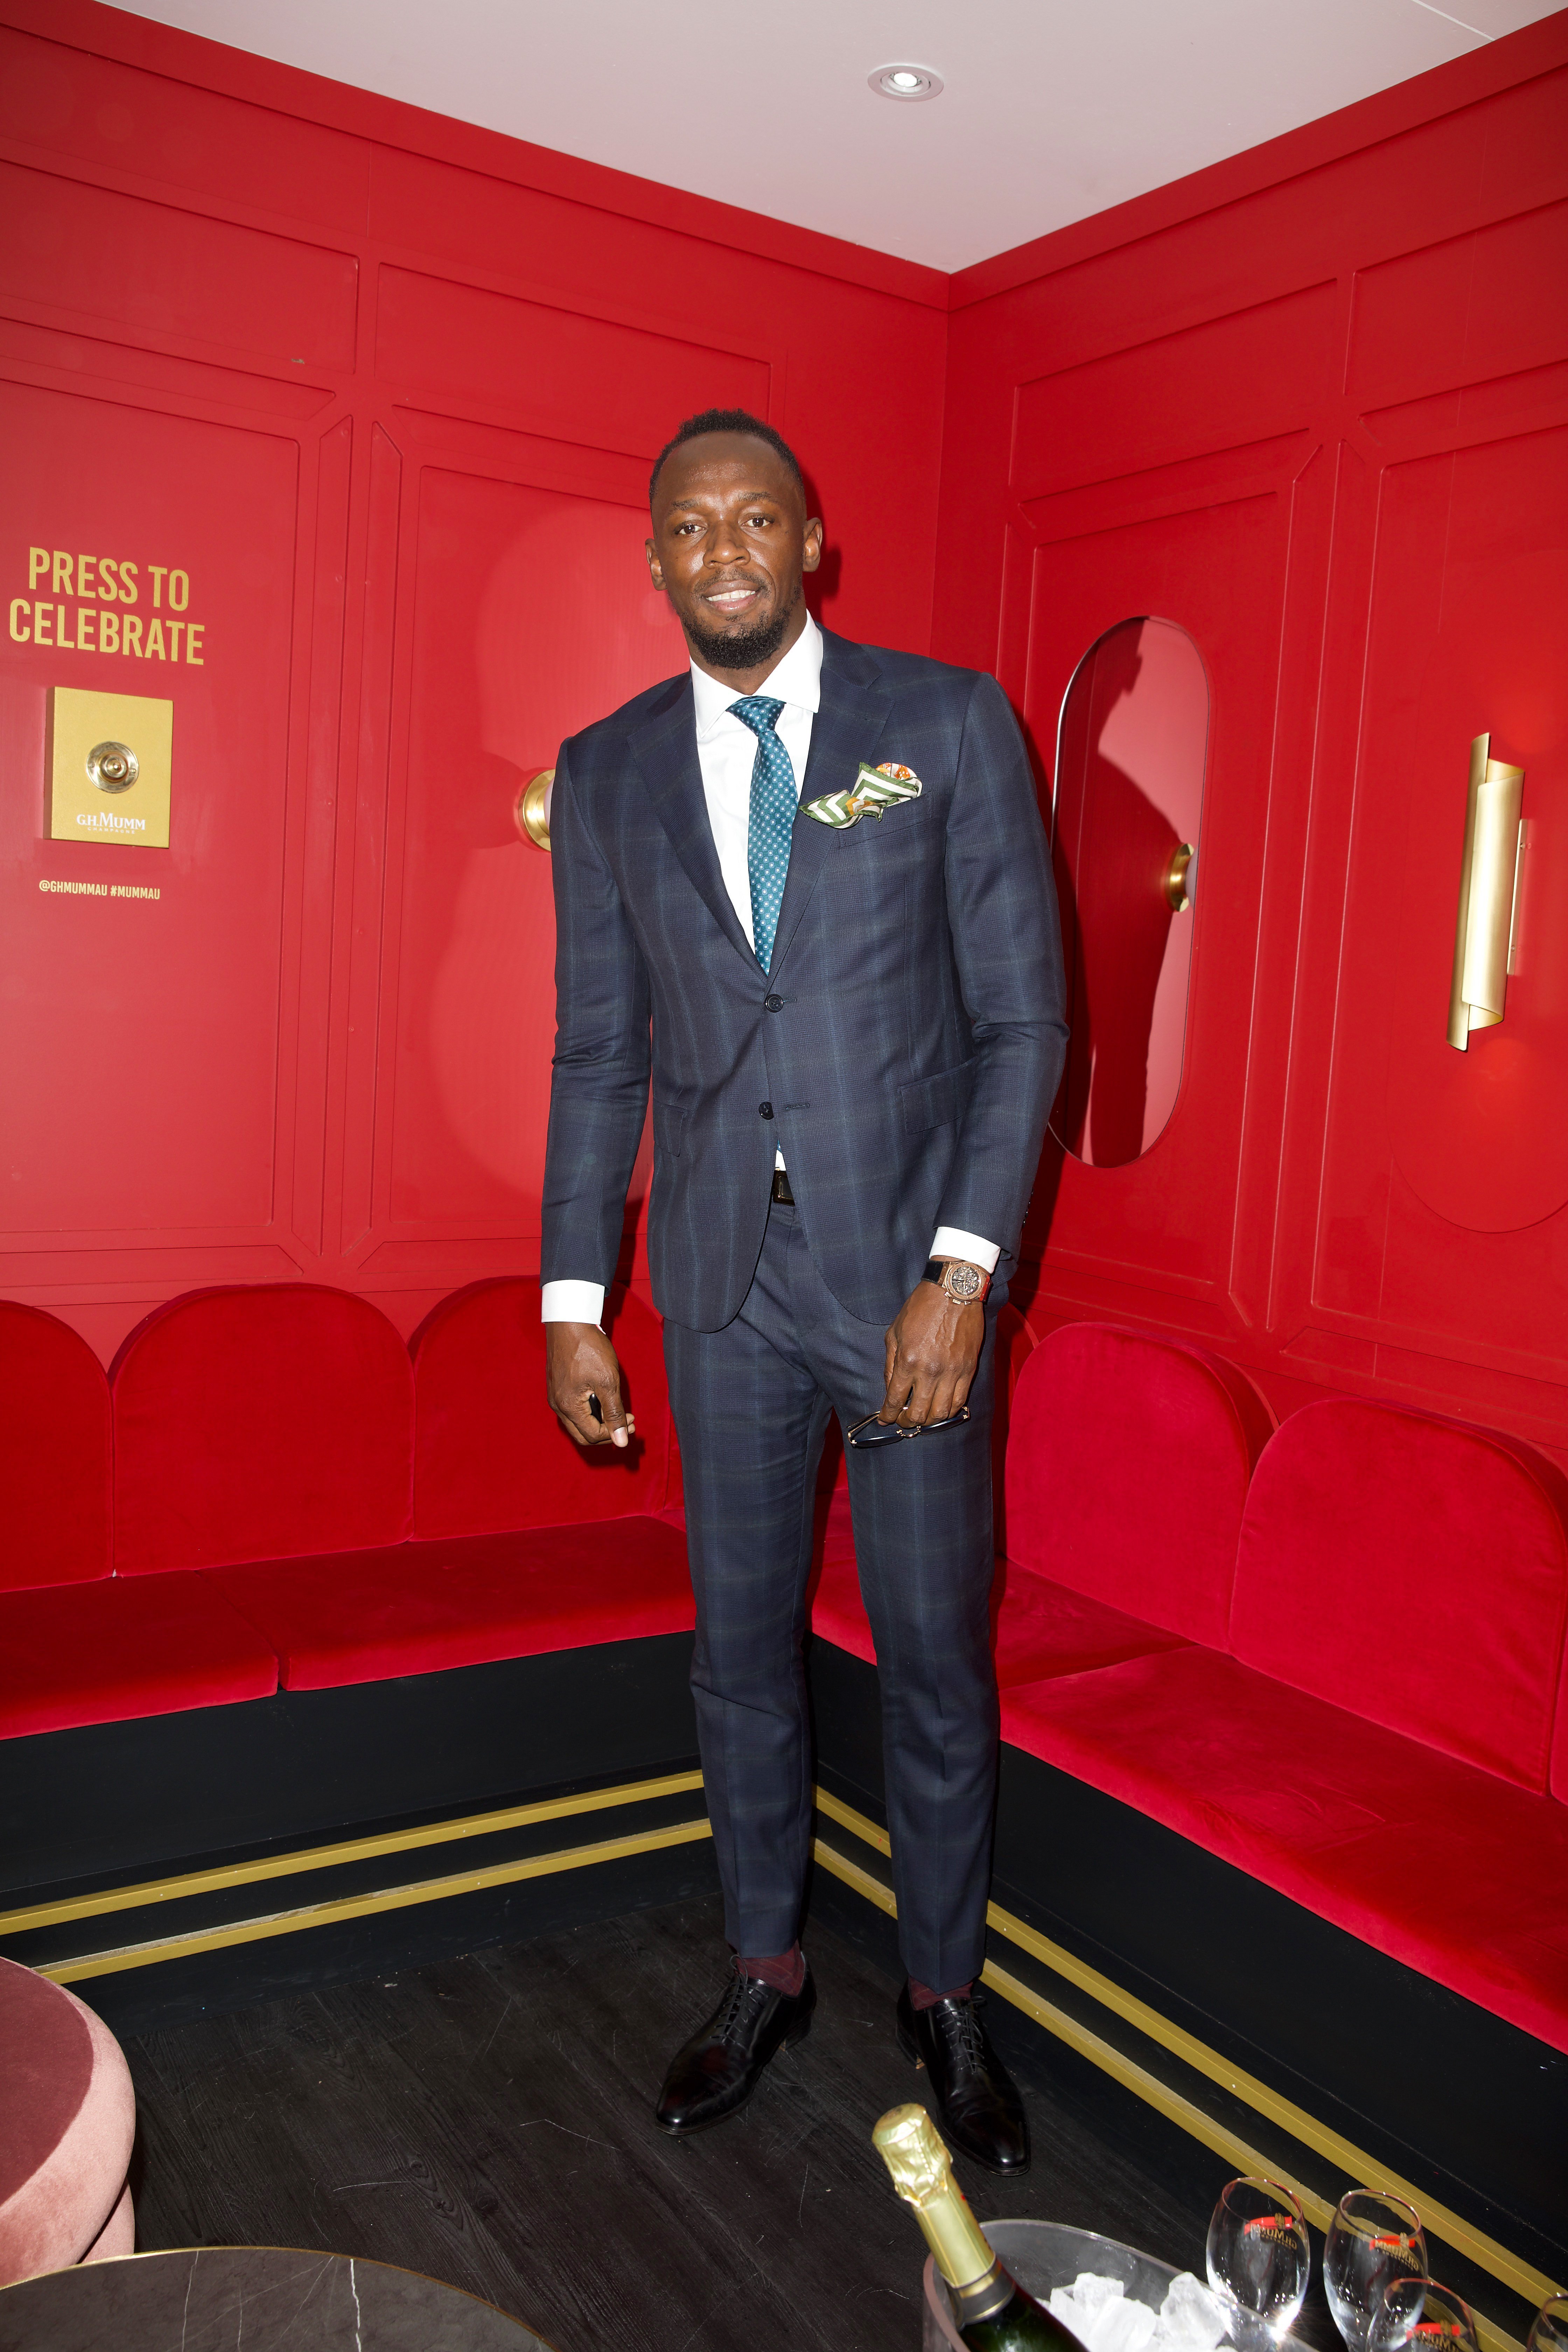 Usain Bolt at the Mumm marquee on Melbourne Cup Day at Flemington Racecourse on Nov. 05, 2019 in Australia | Photo: Getty Images